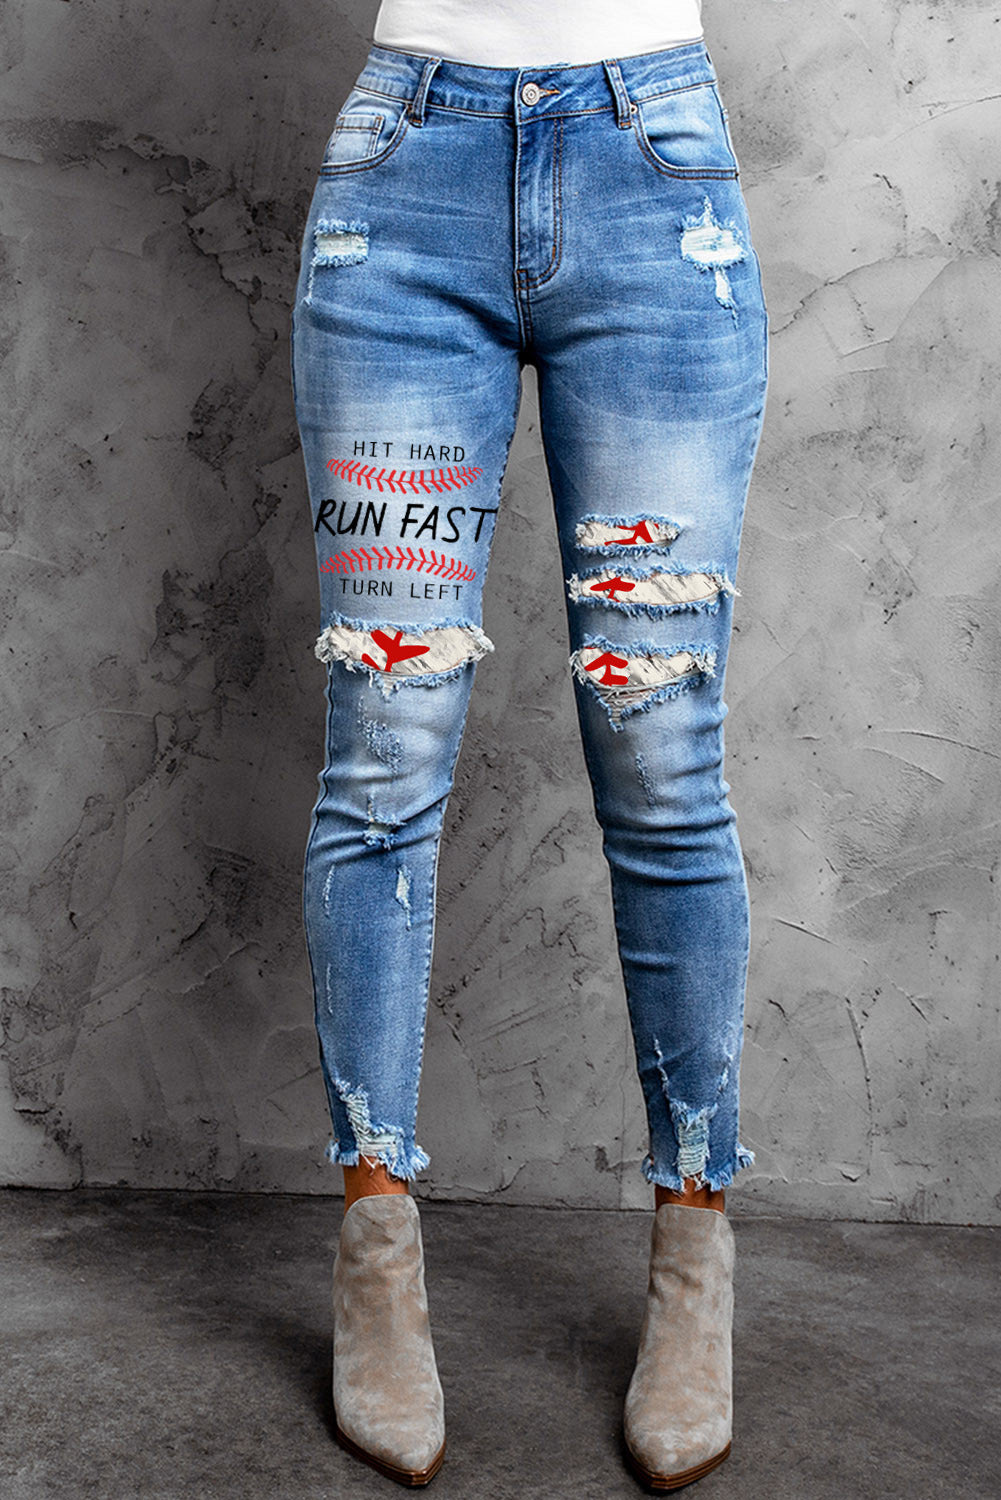 LIFE IS BETTER in the MOUNTAINS Distressed Skinny Jeans